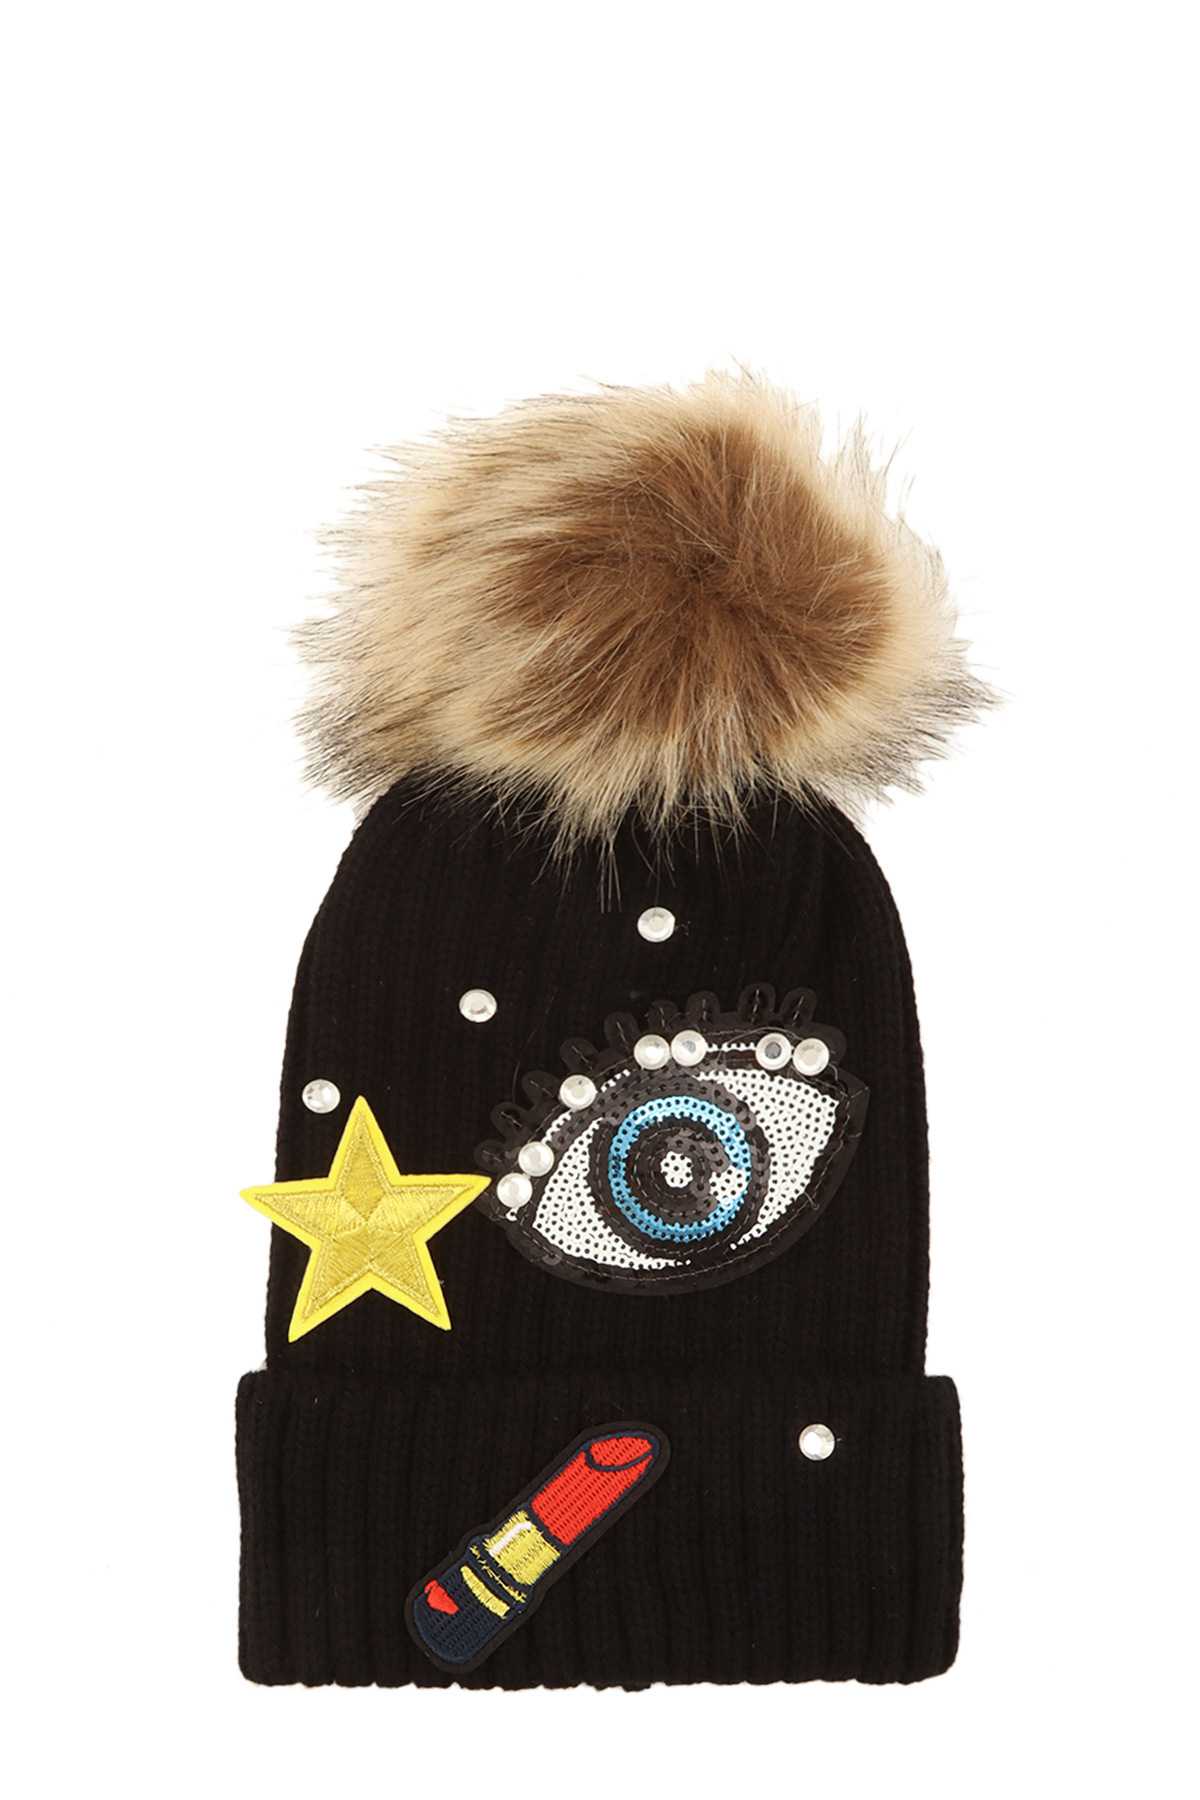 Eye and Star Accent Knit Beanie with Fur Pom